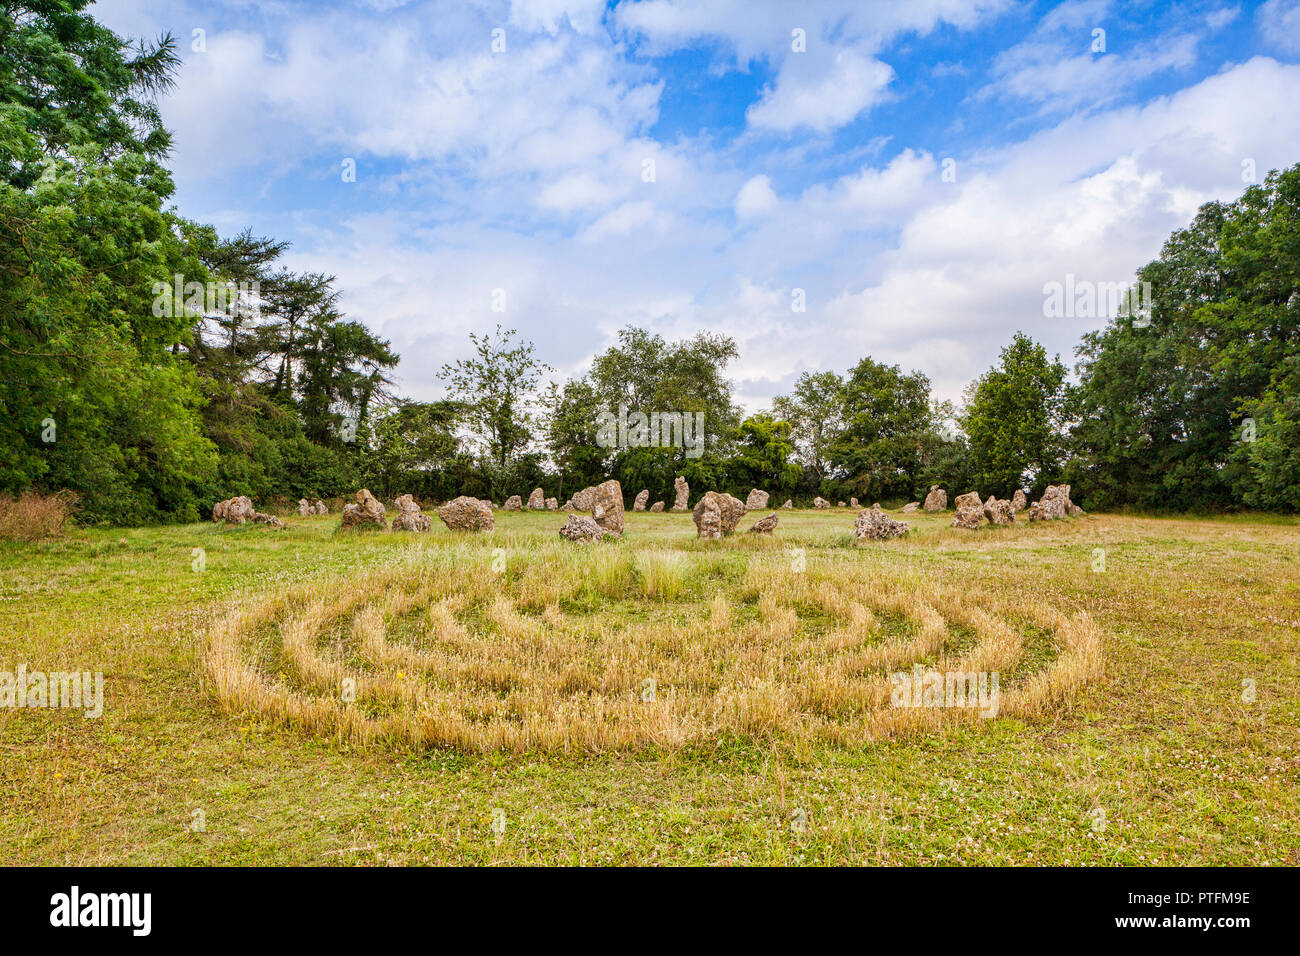 The Rollright Stones or King's Men, a prehistoric stone circle in the Rollrights area of Oxfordshire. Stock Photo